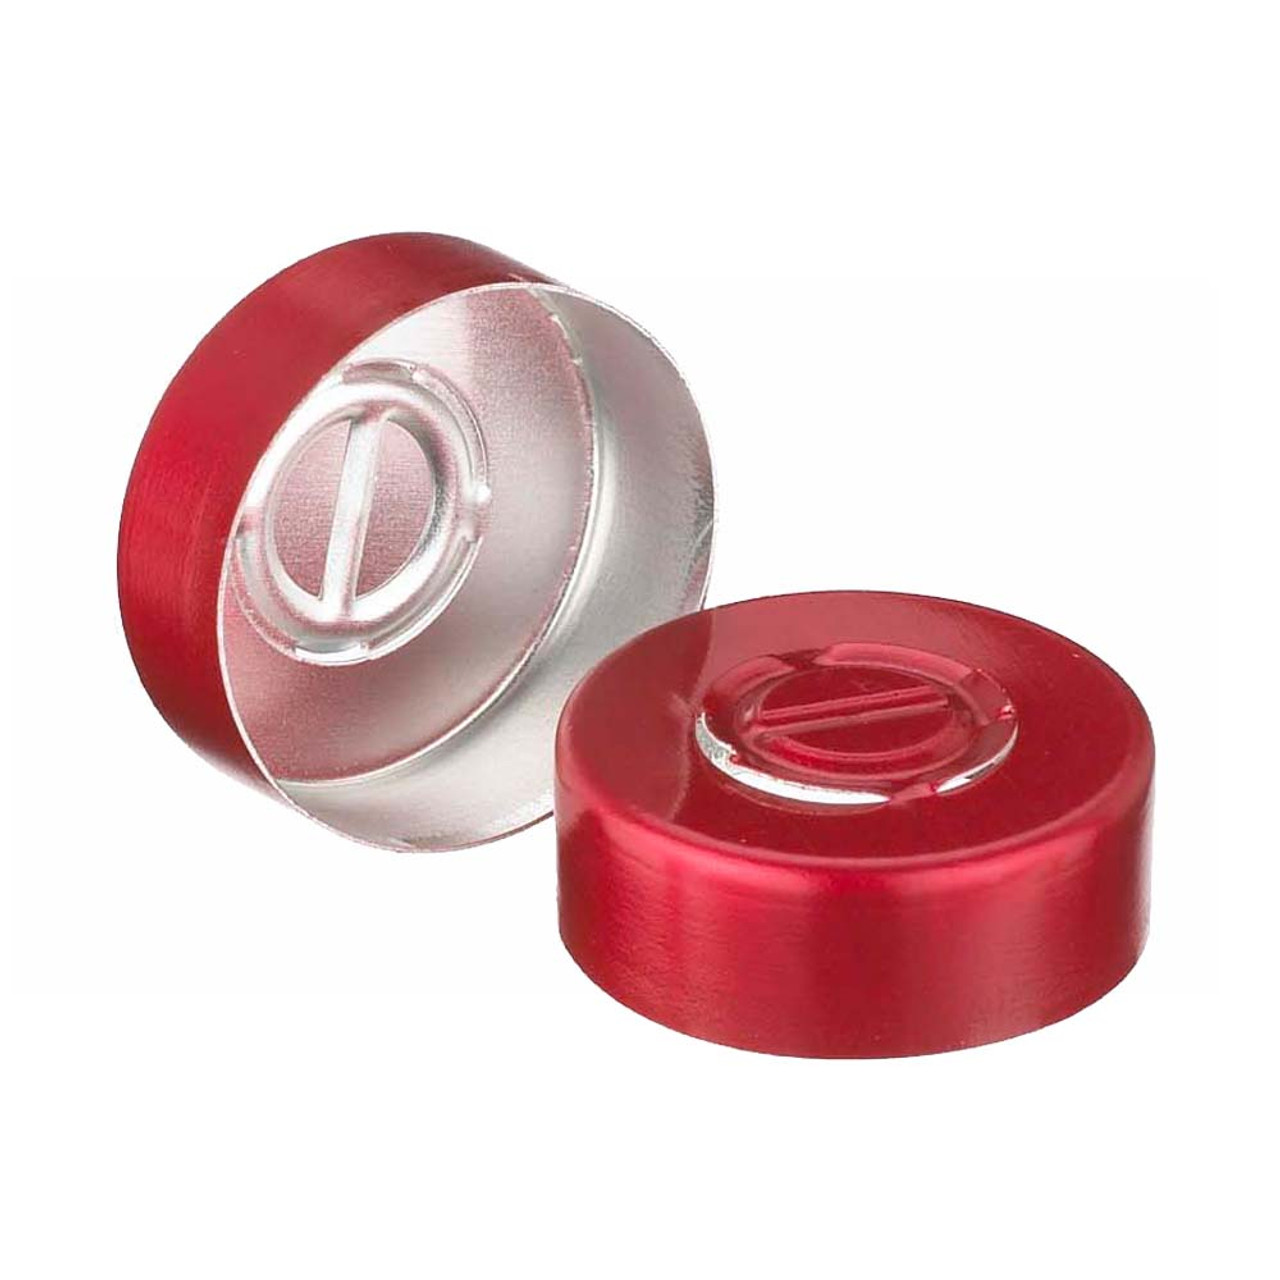 WHEATON® 20mm Crimp Seal, Center Tear-Out, Aluminum Red, Unlined, case/1000